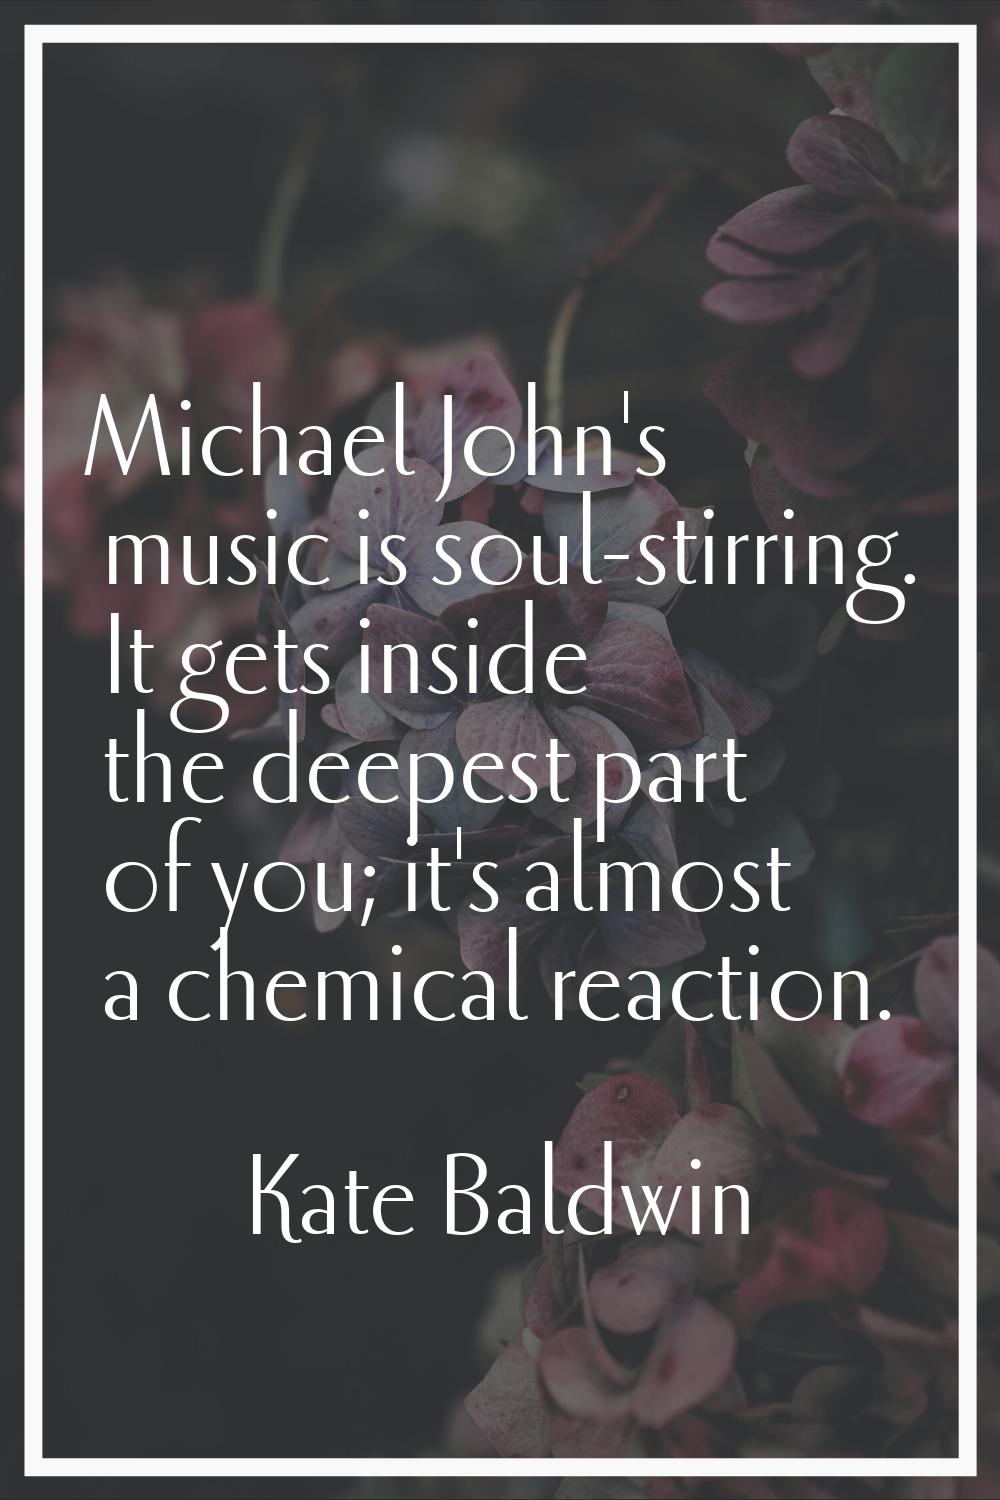 Michael John's music is soul-stirring. It gets inside the deepest part of you; it's almost a chemic